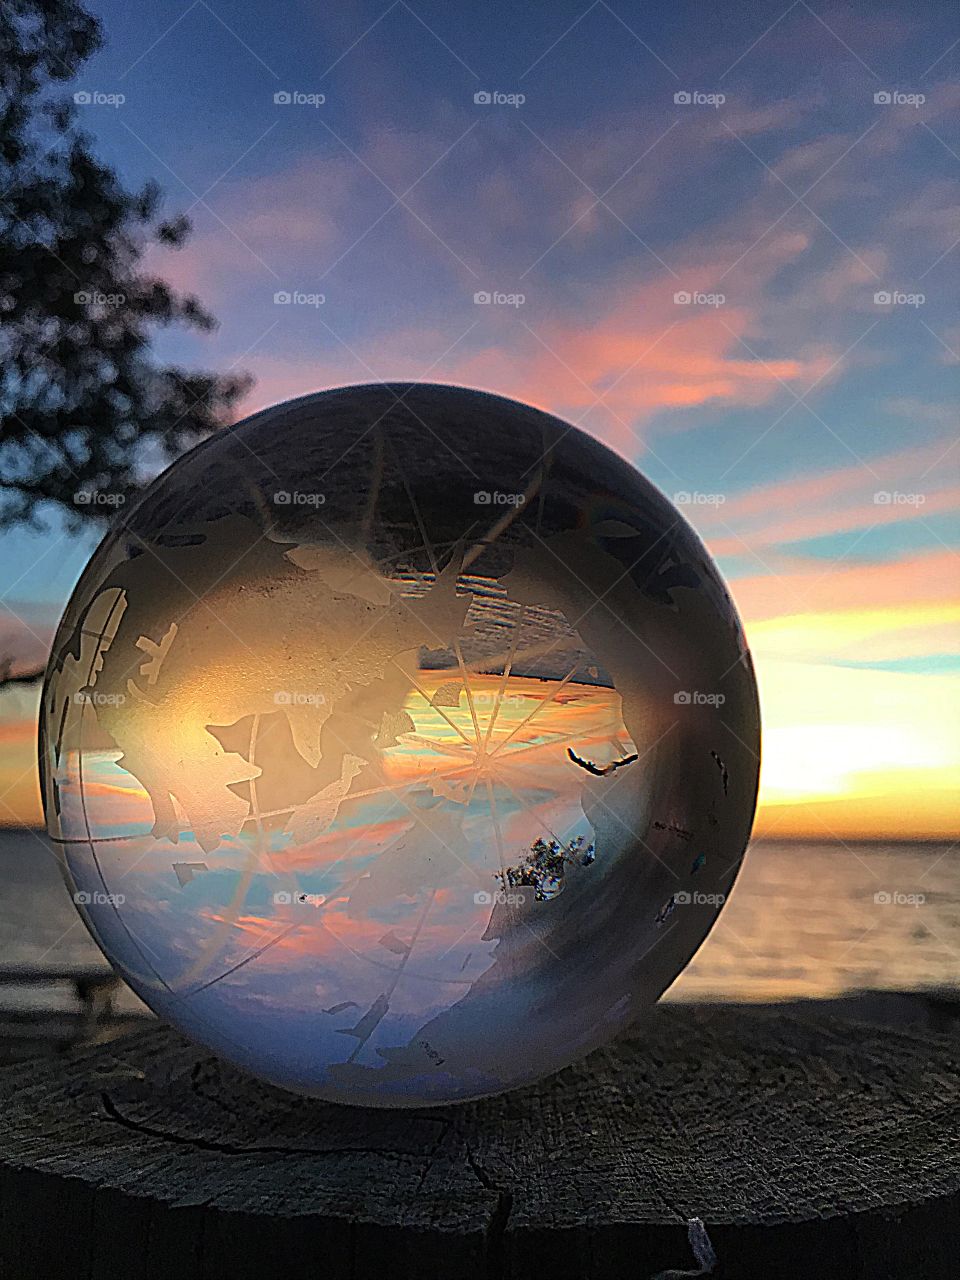 Sunset Extravaganza - sunset through the crystal ball, a refraction of light